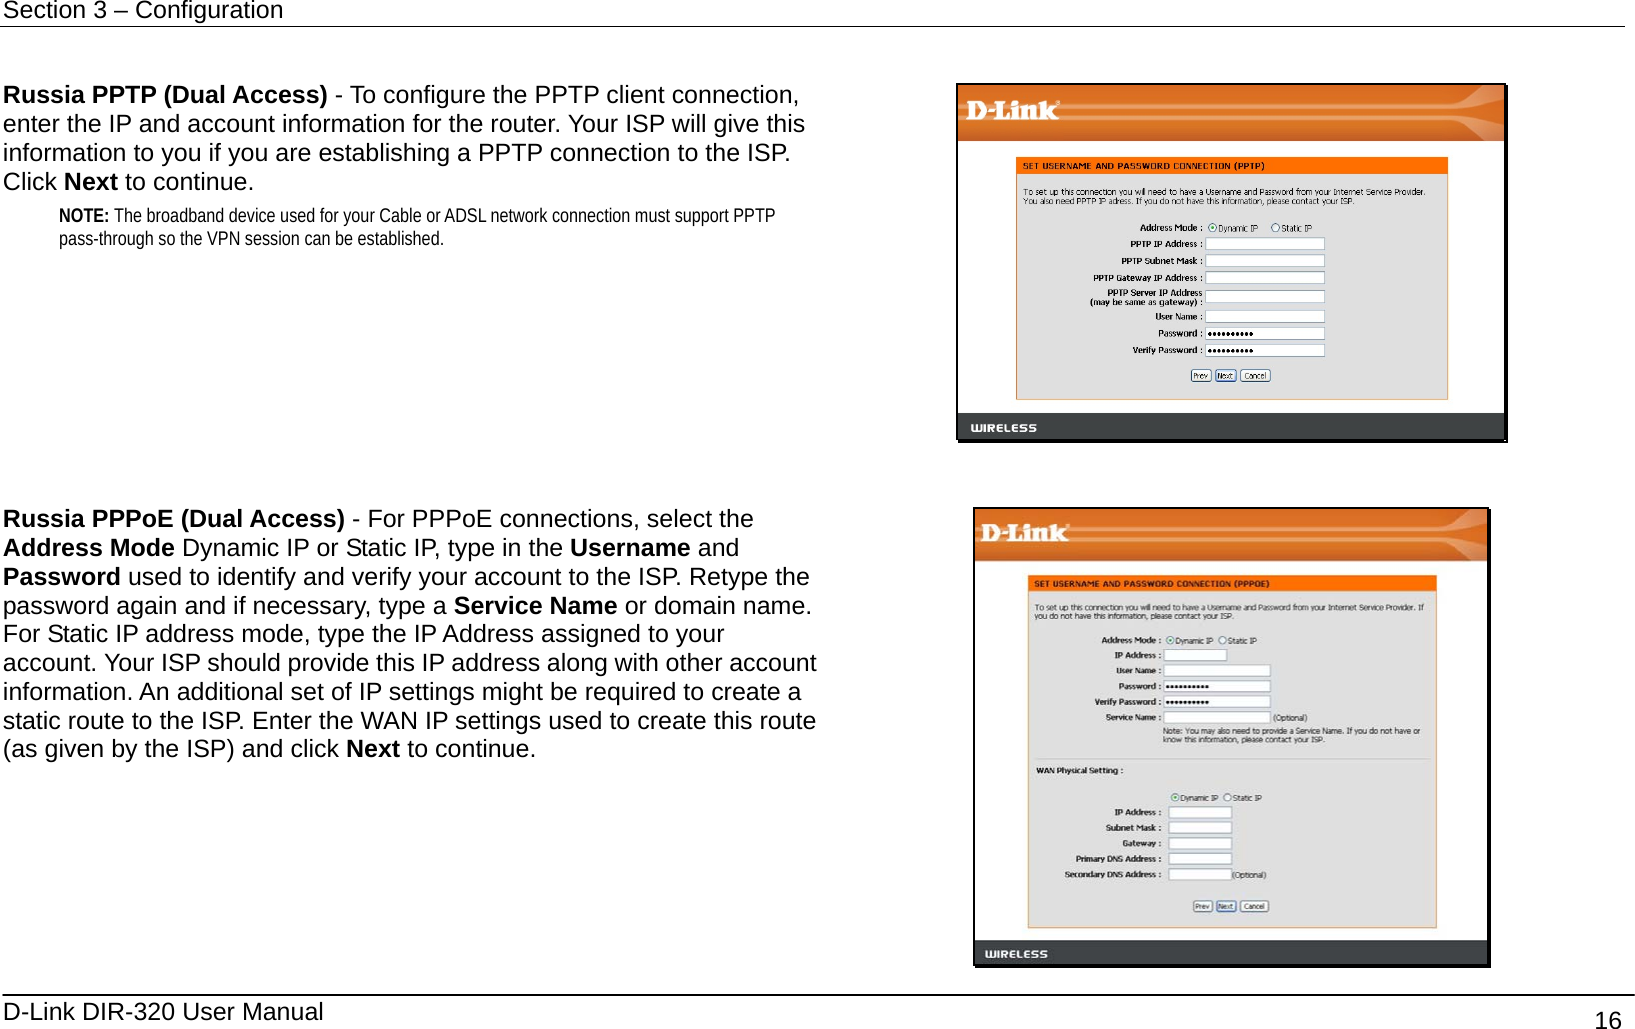 Section 3 – Configuration   D-Link DIR-320 User Manual                                       16  Russia PPTP (Dual Access) - To configure the PPTP client connection, enter the IP and account information for the router. Your ISP will give this information to you if you are establishing a PPTP connection to the ISP. Click Next to continue. NOTE: The broadband device used for your Cable or ADSL network connection must support PPTP pass-through so the VPN session can be established.    Russia PPPoE (Dual Access) - For PPPoE connections, select the Address Mode Dynamic IP or Static IP, type in the Username and Password used to identify and verify your account to the ISP. Retype the password again and if necessary, type a Service Name or domain name. For Static IP address mode, type the IP Address assigned to your account. Your ISP should provide this IP address along with other account information. An additional set of IP settings might be required to create a static route to the ISP. Enter the WAN IP settings used to create this route (as given by the ISP) and click Next to continue.  